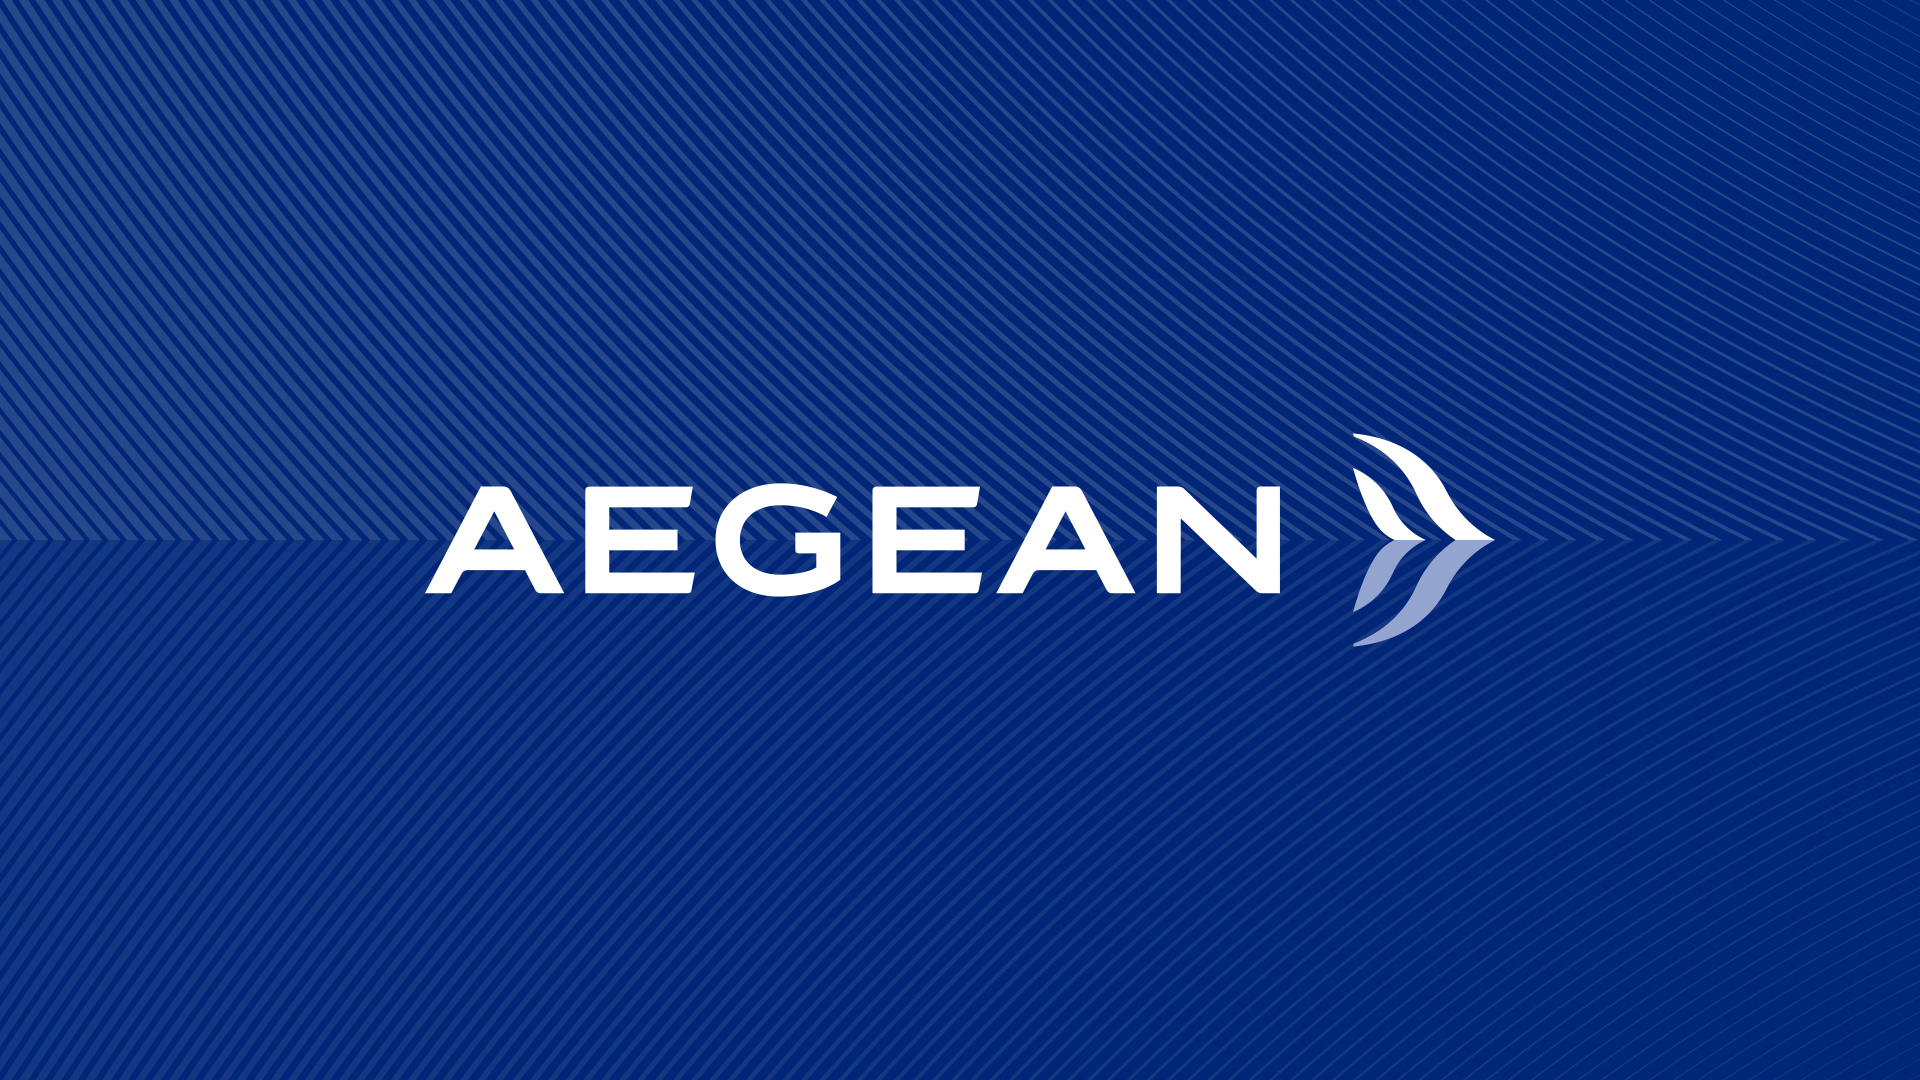 New Logo, Identity, and Livery for Aegean by PriestmanGoode